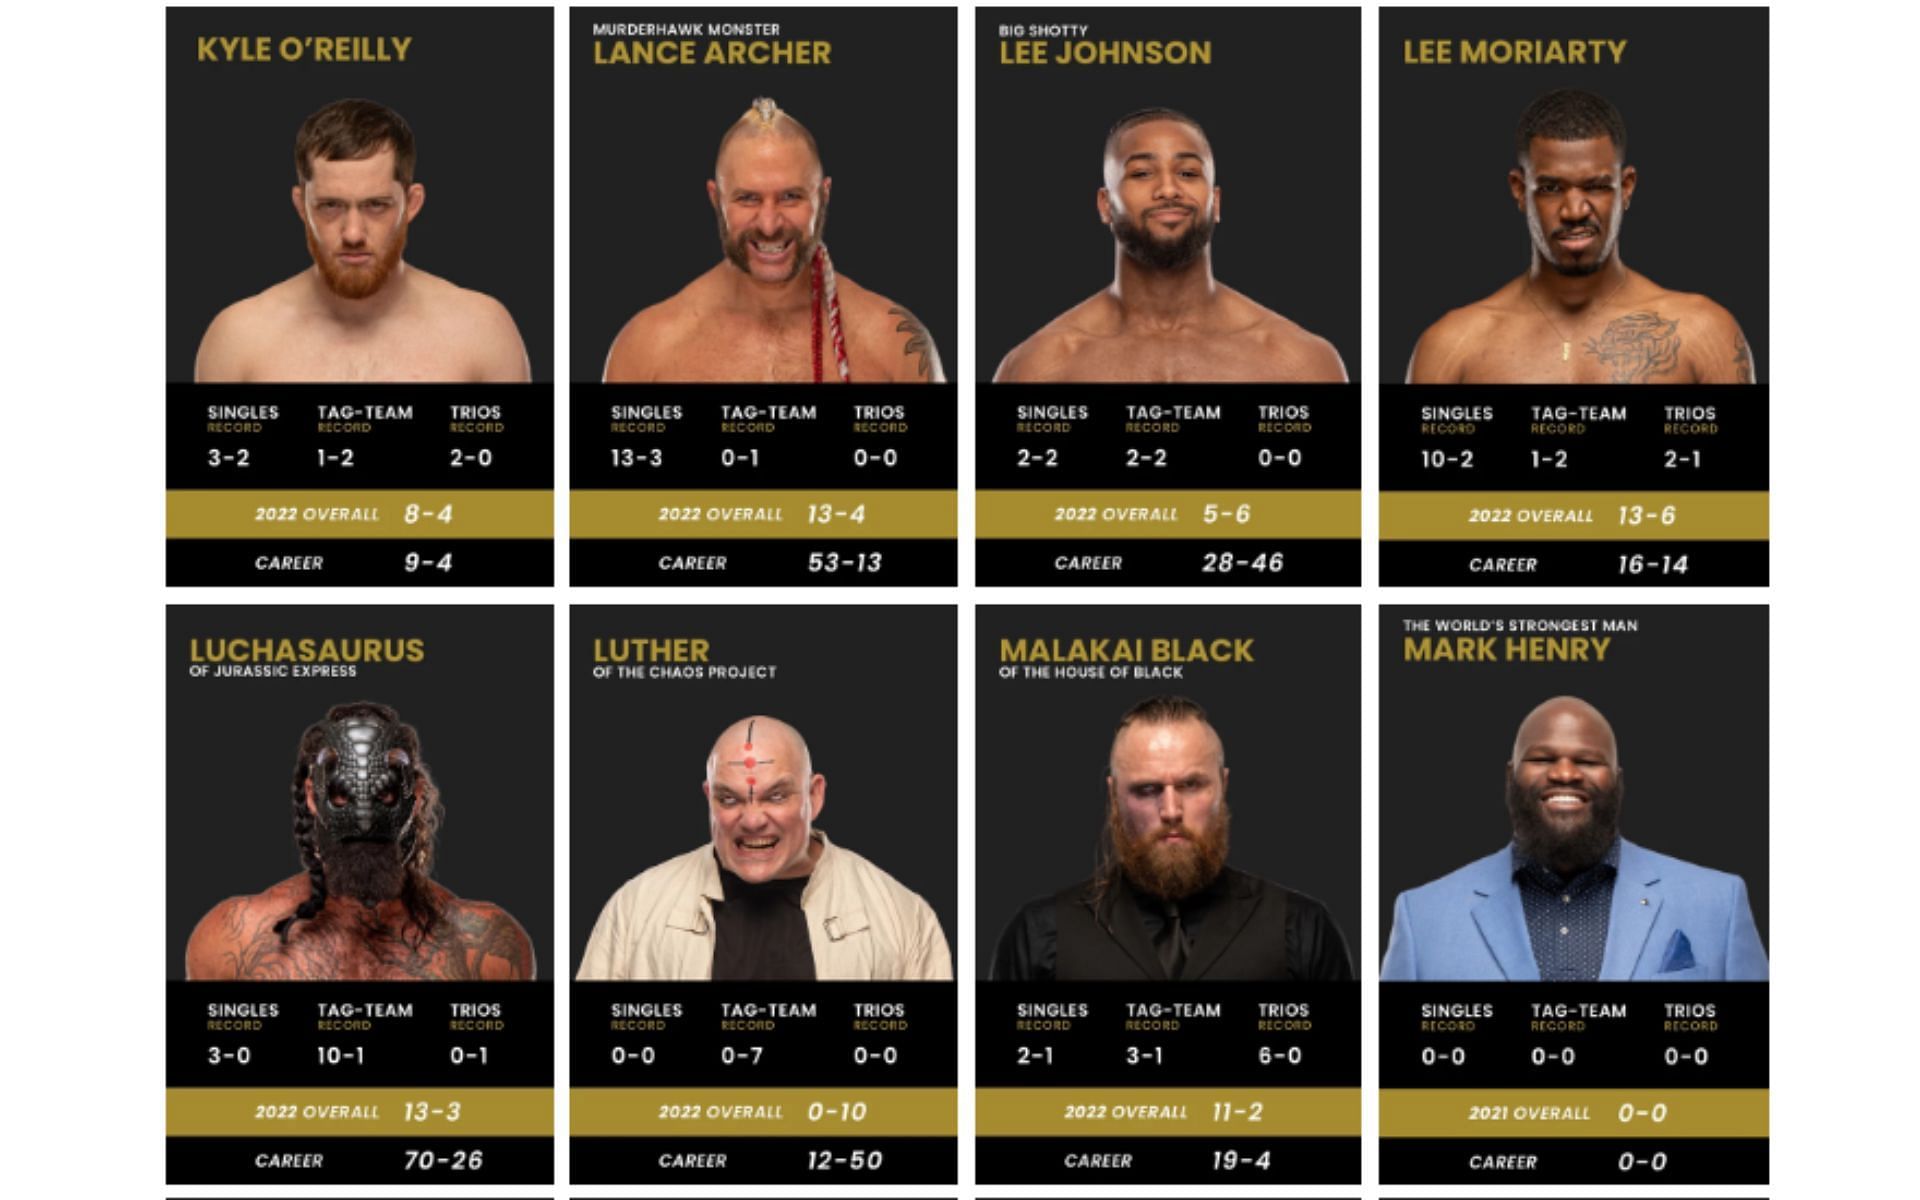 Malakai Black is still a part of the AEW roster on their official website